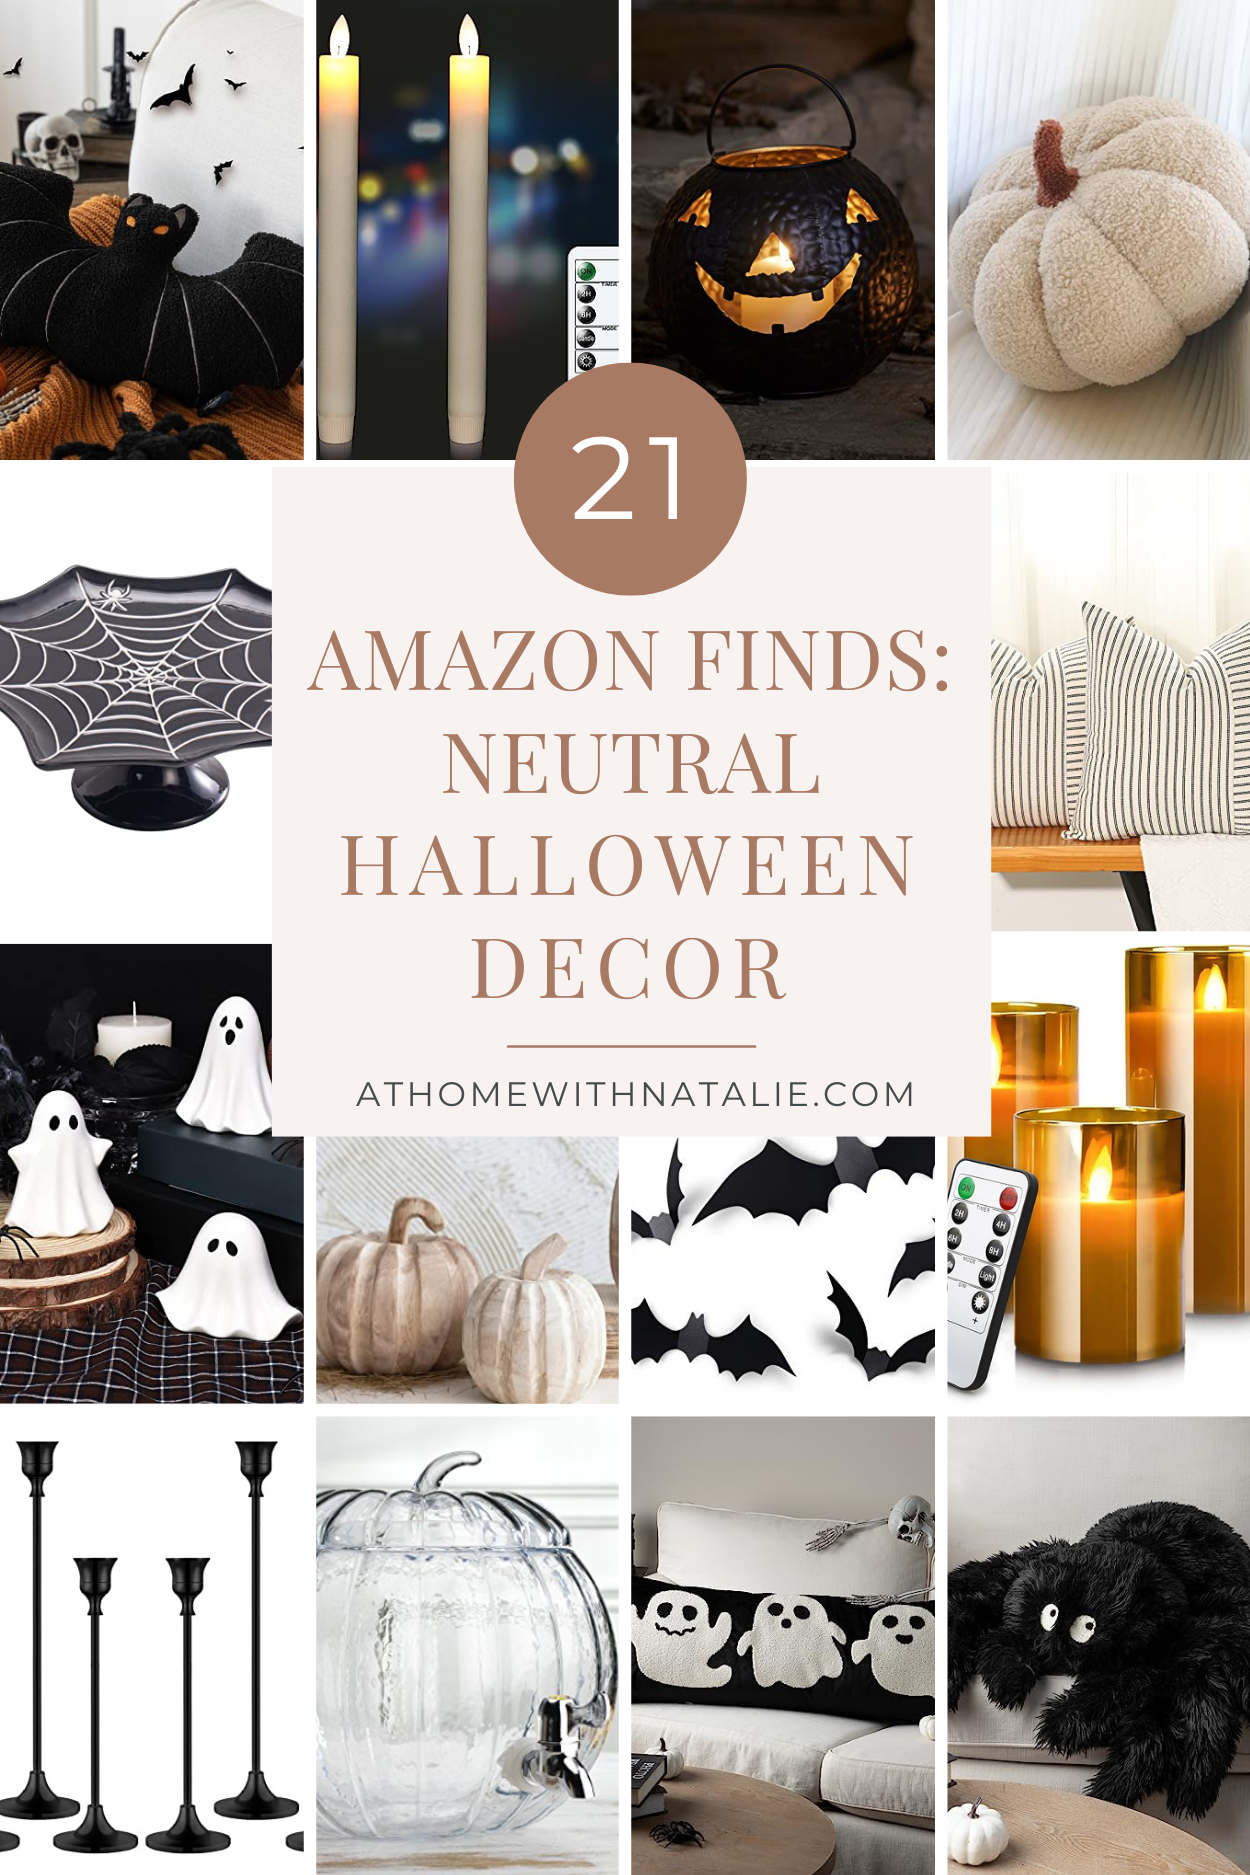 Finds-Neutral Halloween Decor – At Home With Natalie